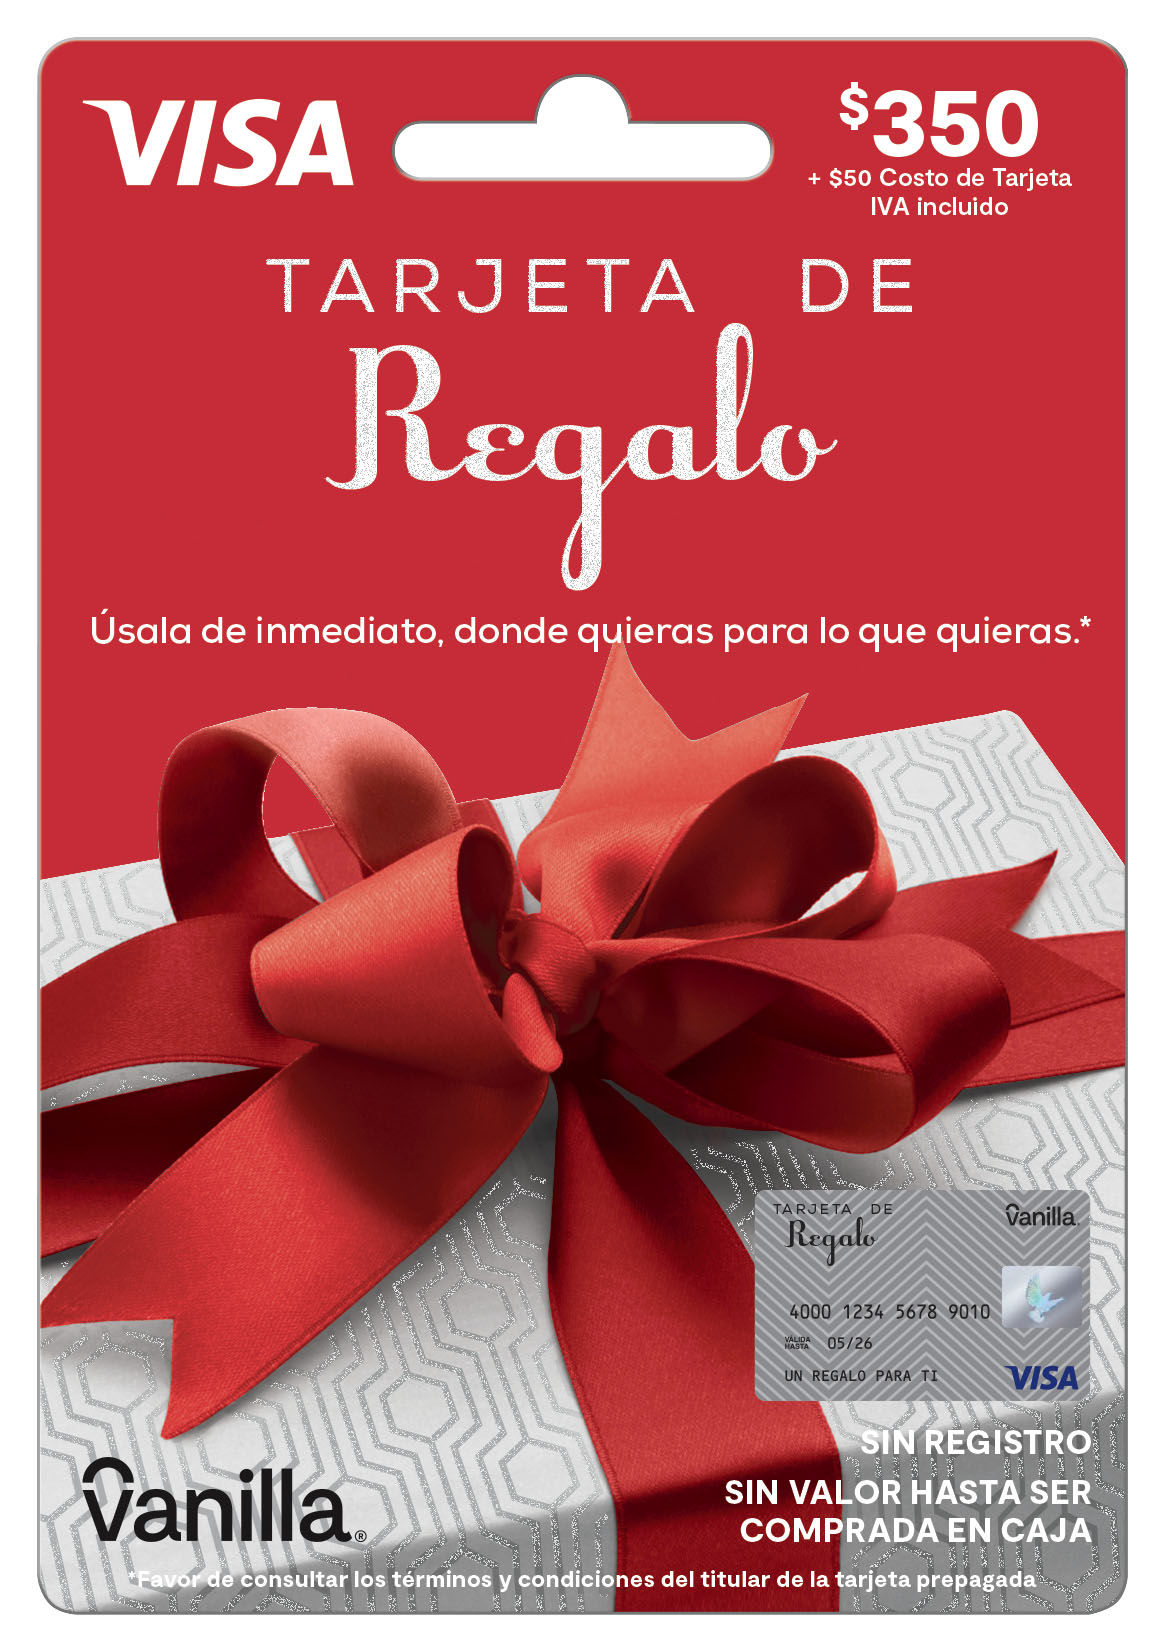 italiano tierra principal evaporación The ideal gift for everyone debuts in Mexico: Vanilla® Visa, Global Prepaid  and Gift Card Brand, Launched